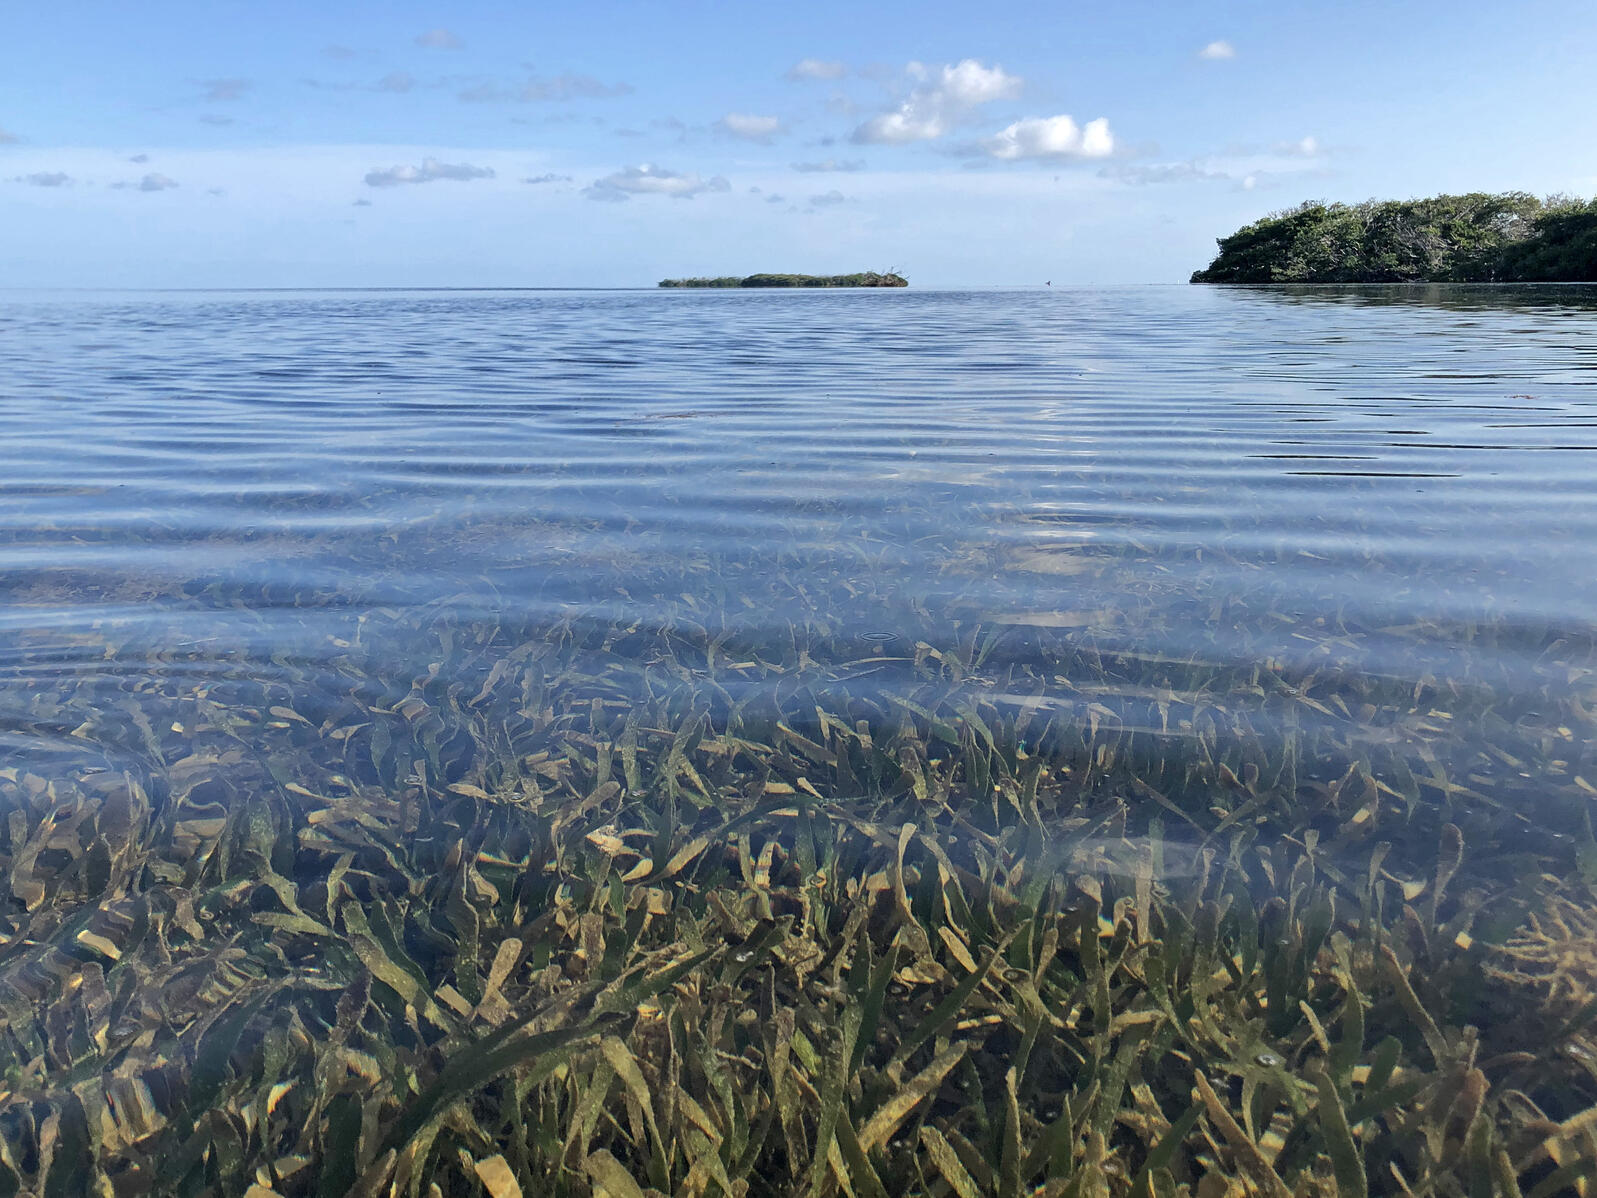 A seagrass bed in Florida Bay